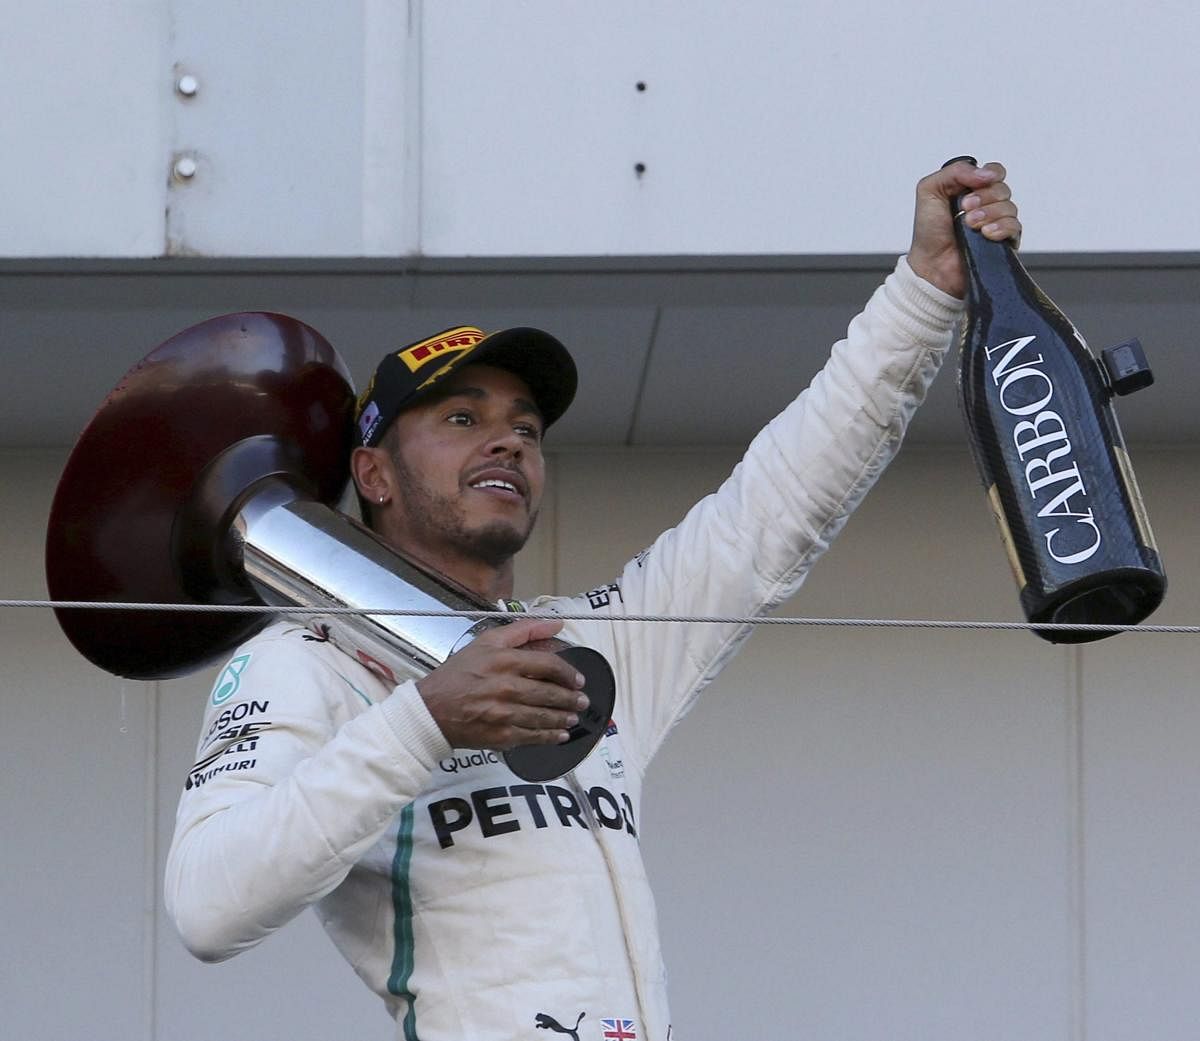 Mercedes driver Lewis Hamilton of Britain holds his trophy and a bottle of champagne on the podium after winning the Japanese Formula One Grand Prix at the Suzuka Circuit in Suzuka, central Japan on Sunday. (AP/PTI Photo)